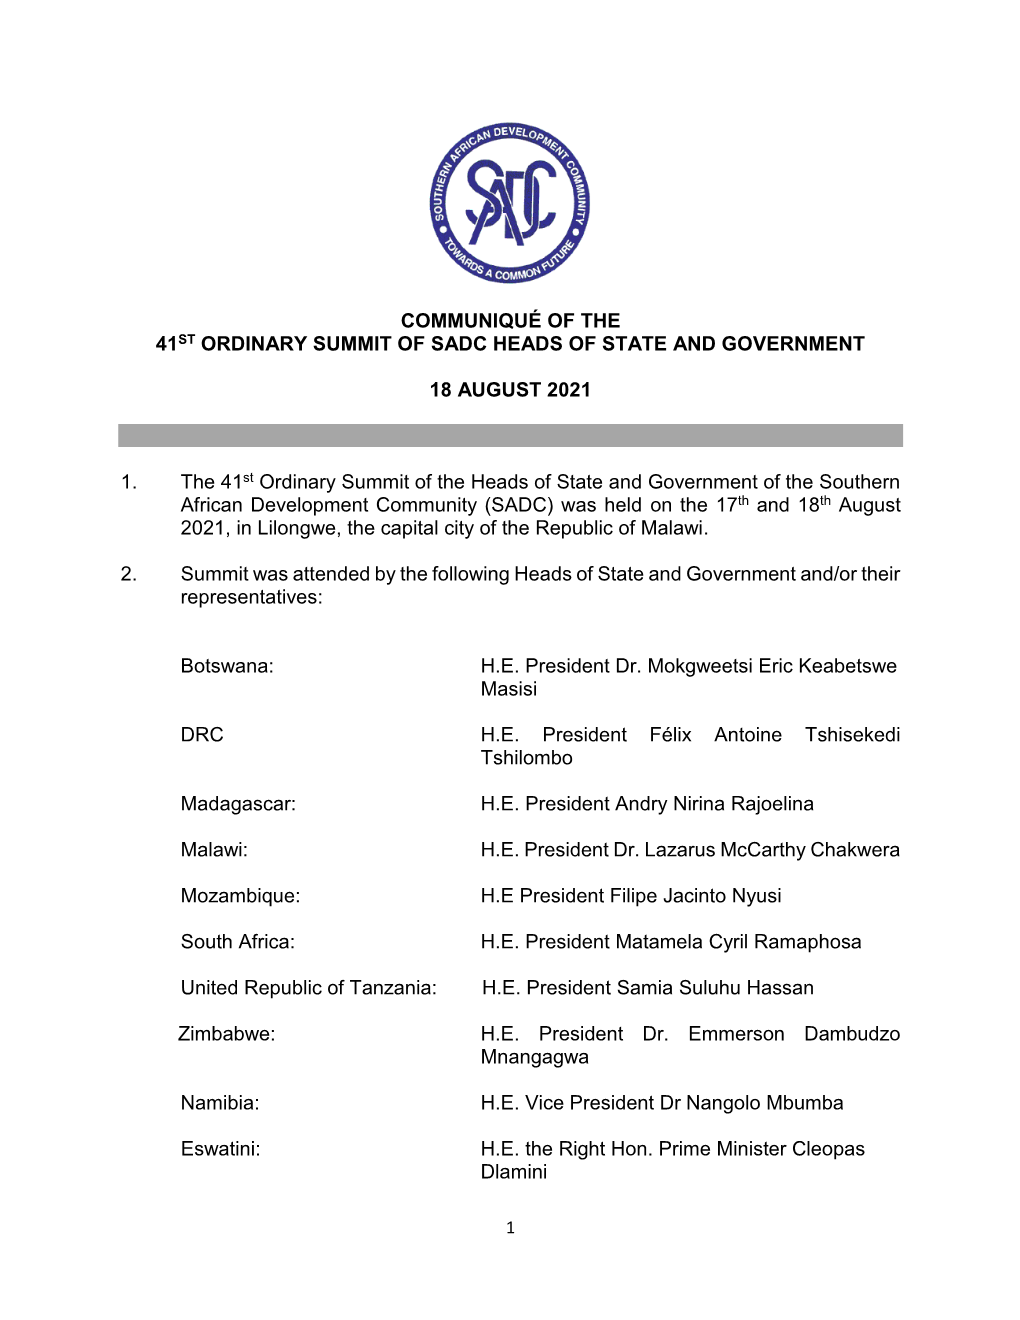 Communiqué of the 41St Ordinary Summit of Sadc Heads of State and Government 18 August 2021